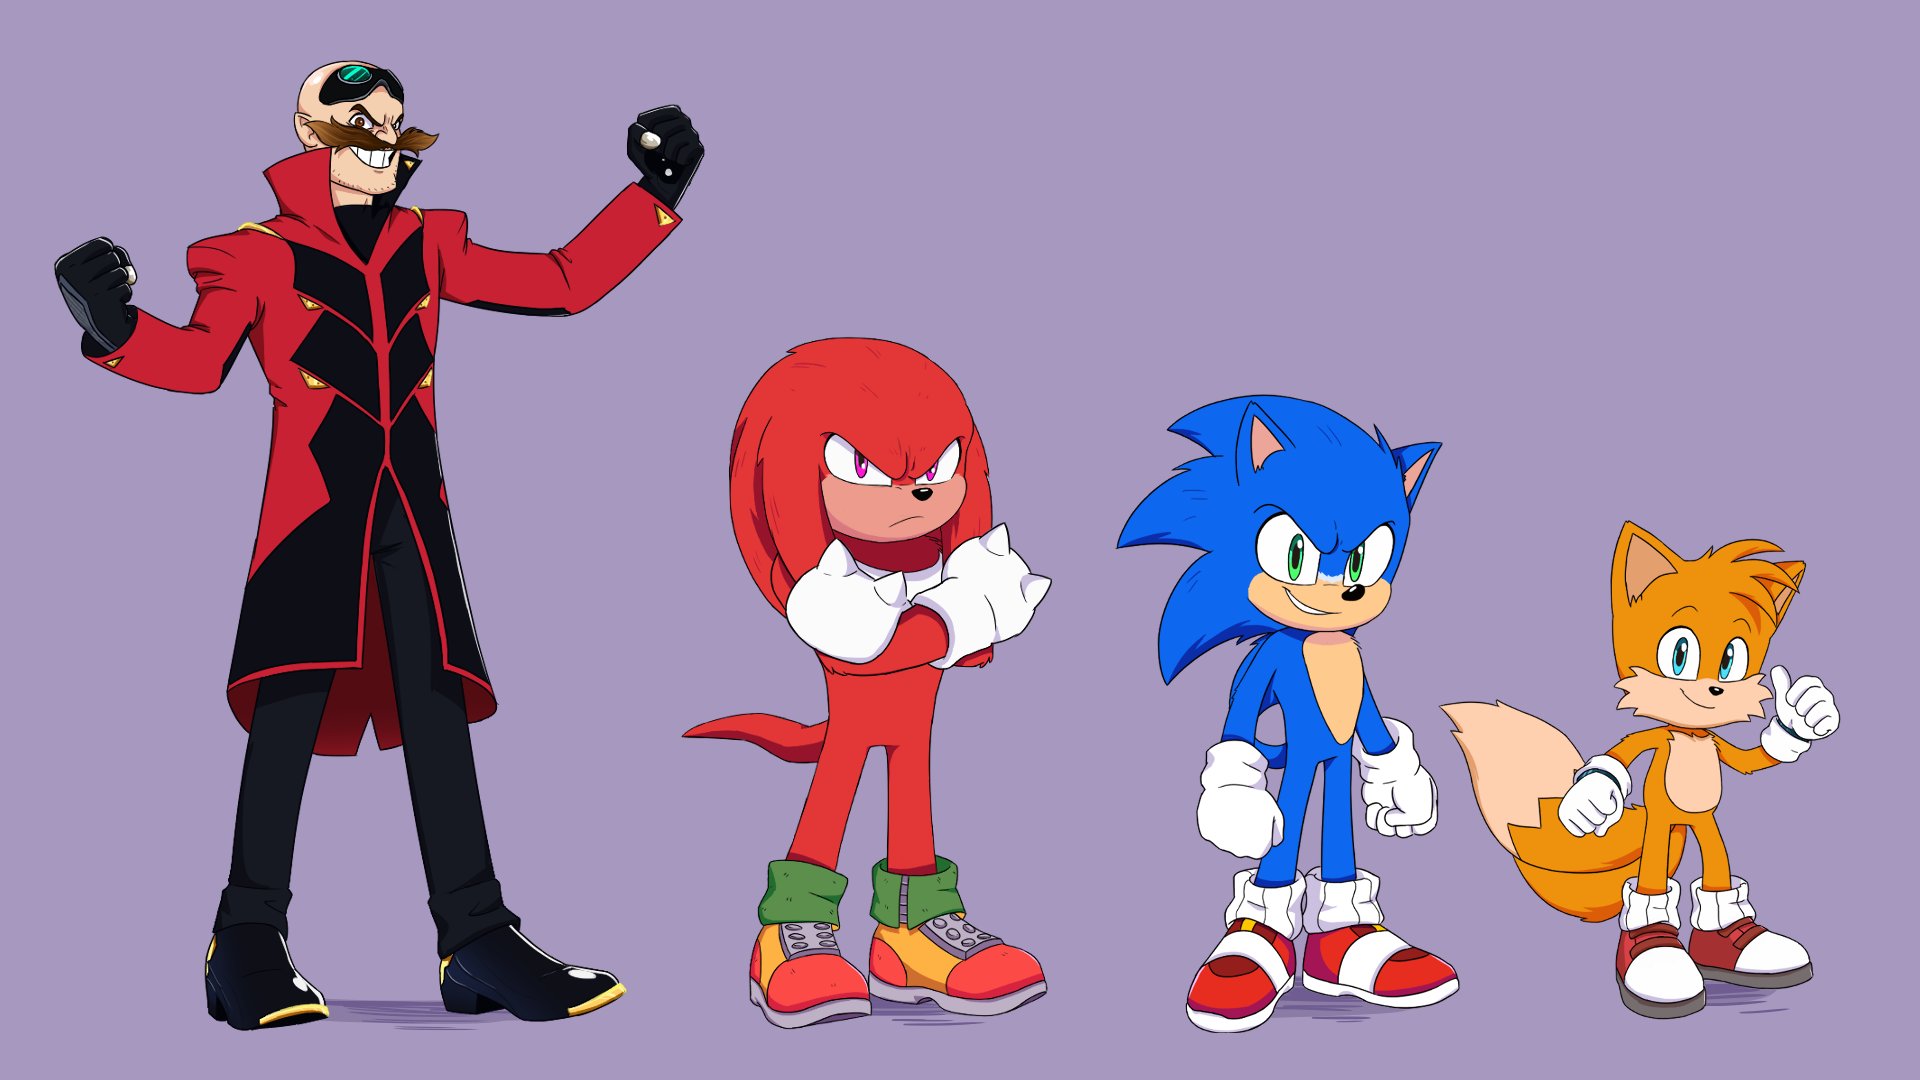 movie, sonic the hedgehog 2, doctor eggman, knuckles the echidna, miles 'tails' prower, sonic the hedgehog, sonic